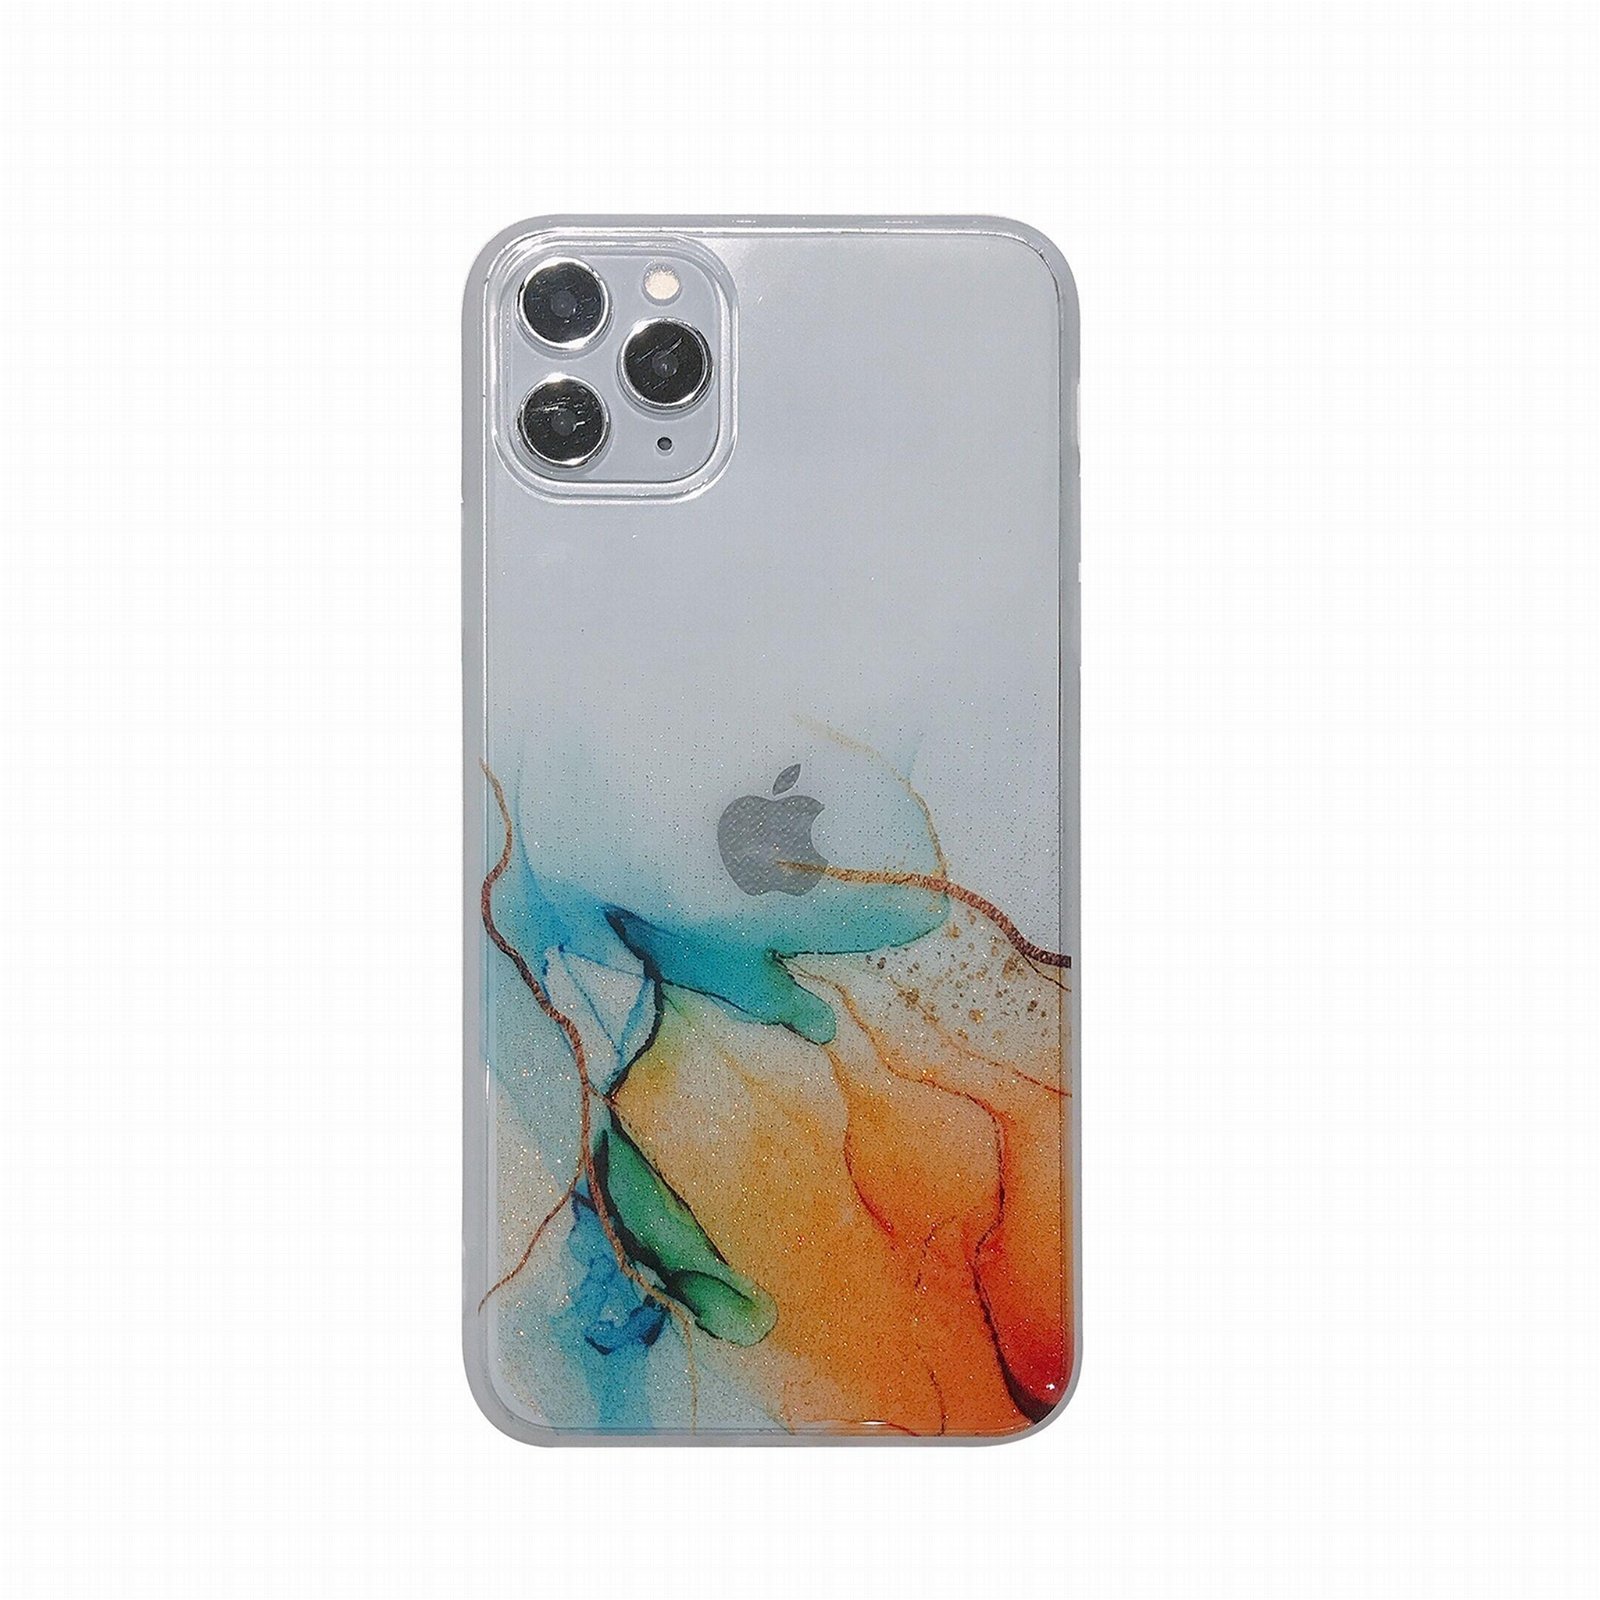 Giltter Symphony Cases for iPhone 6 7 8P X XR XS XSMAX iPhone 11 promax 3